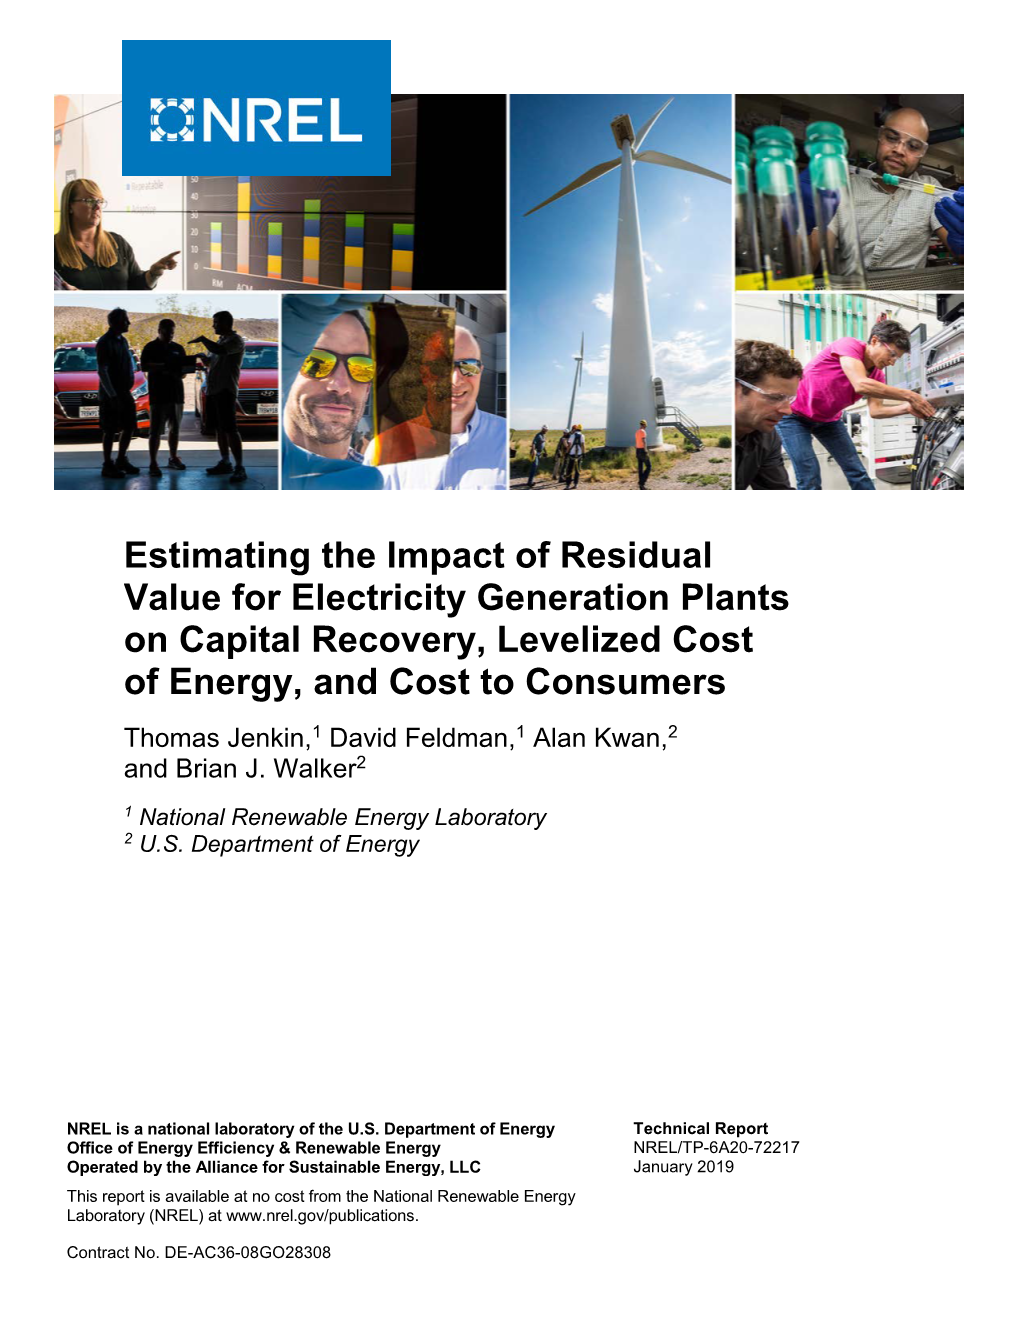 Estimating the Impact of Residual Value for Electricity Generation